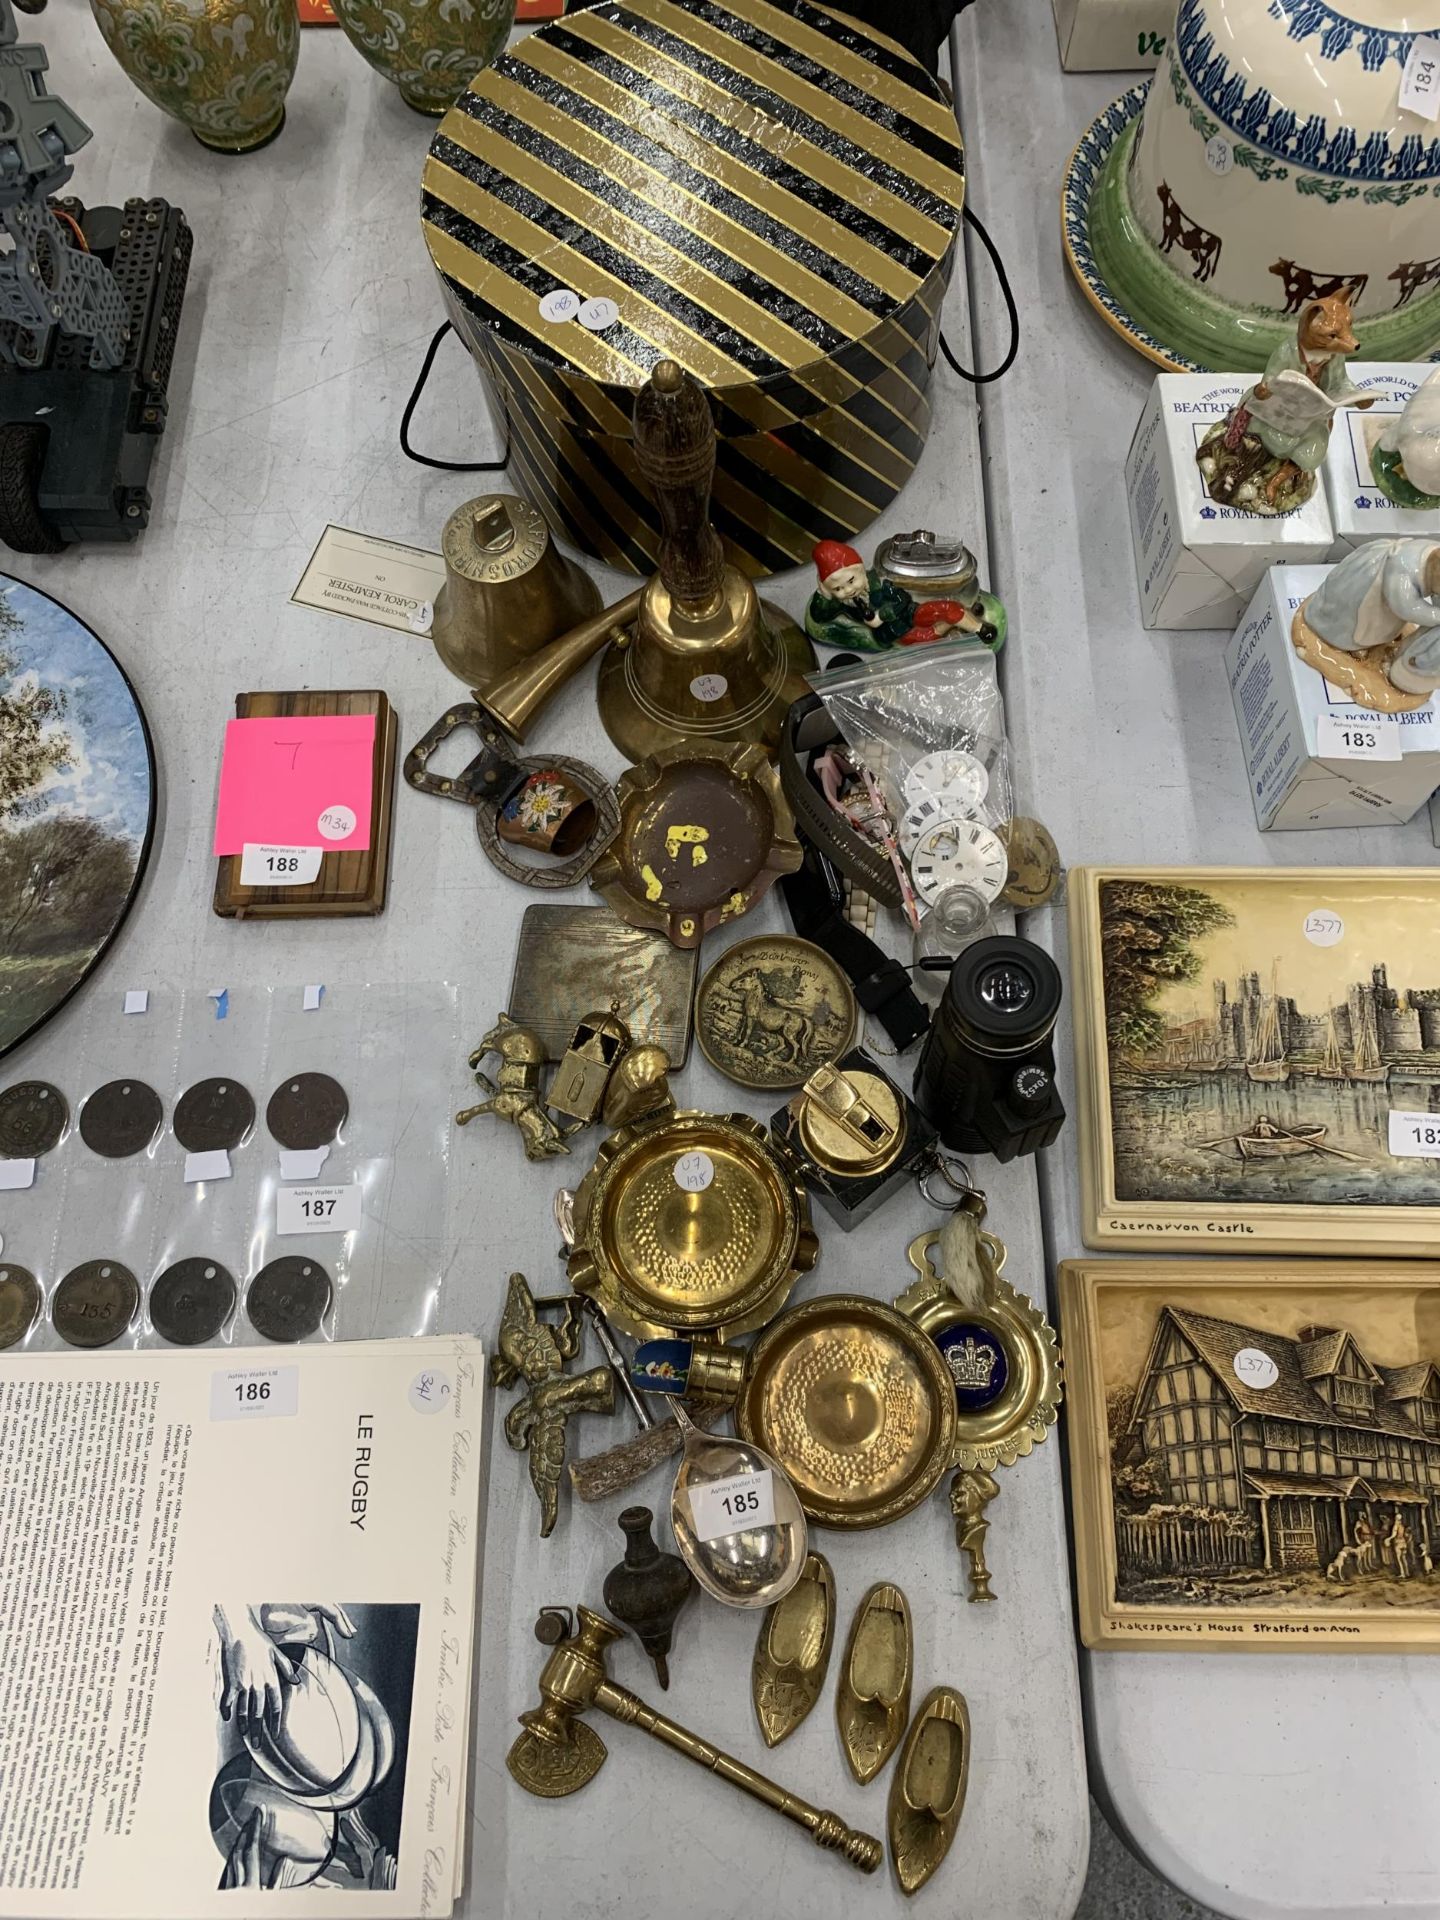 A LARGE COLLECTION OF BRASS ITEMS TO INCLUDE BELLS, FIGURES, ETC PLUS WATCH FACES, A CIGARETTE CASE,